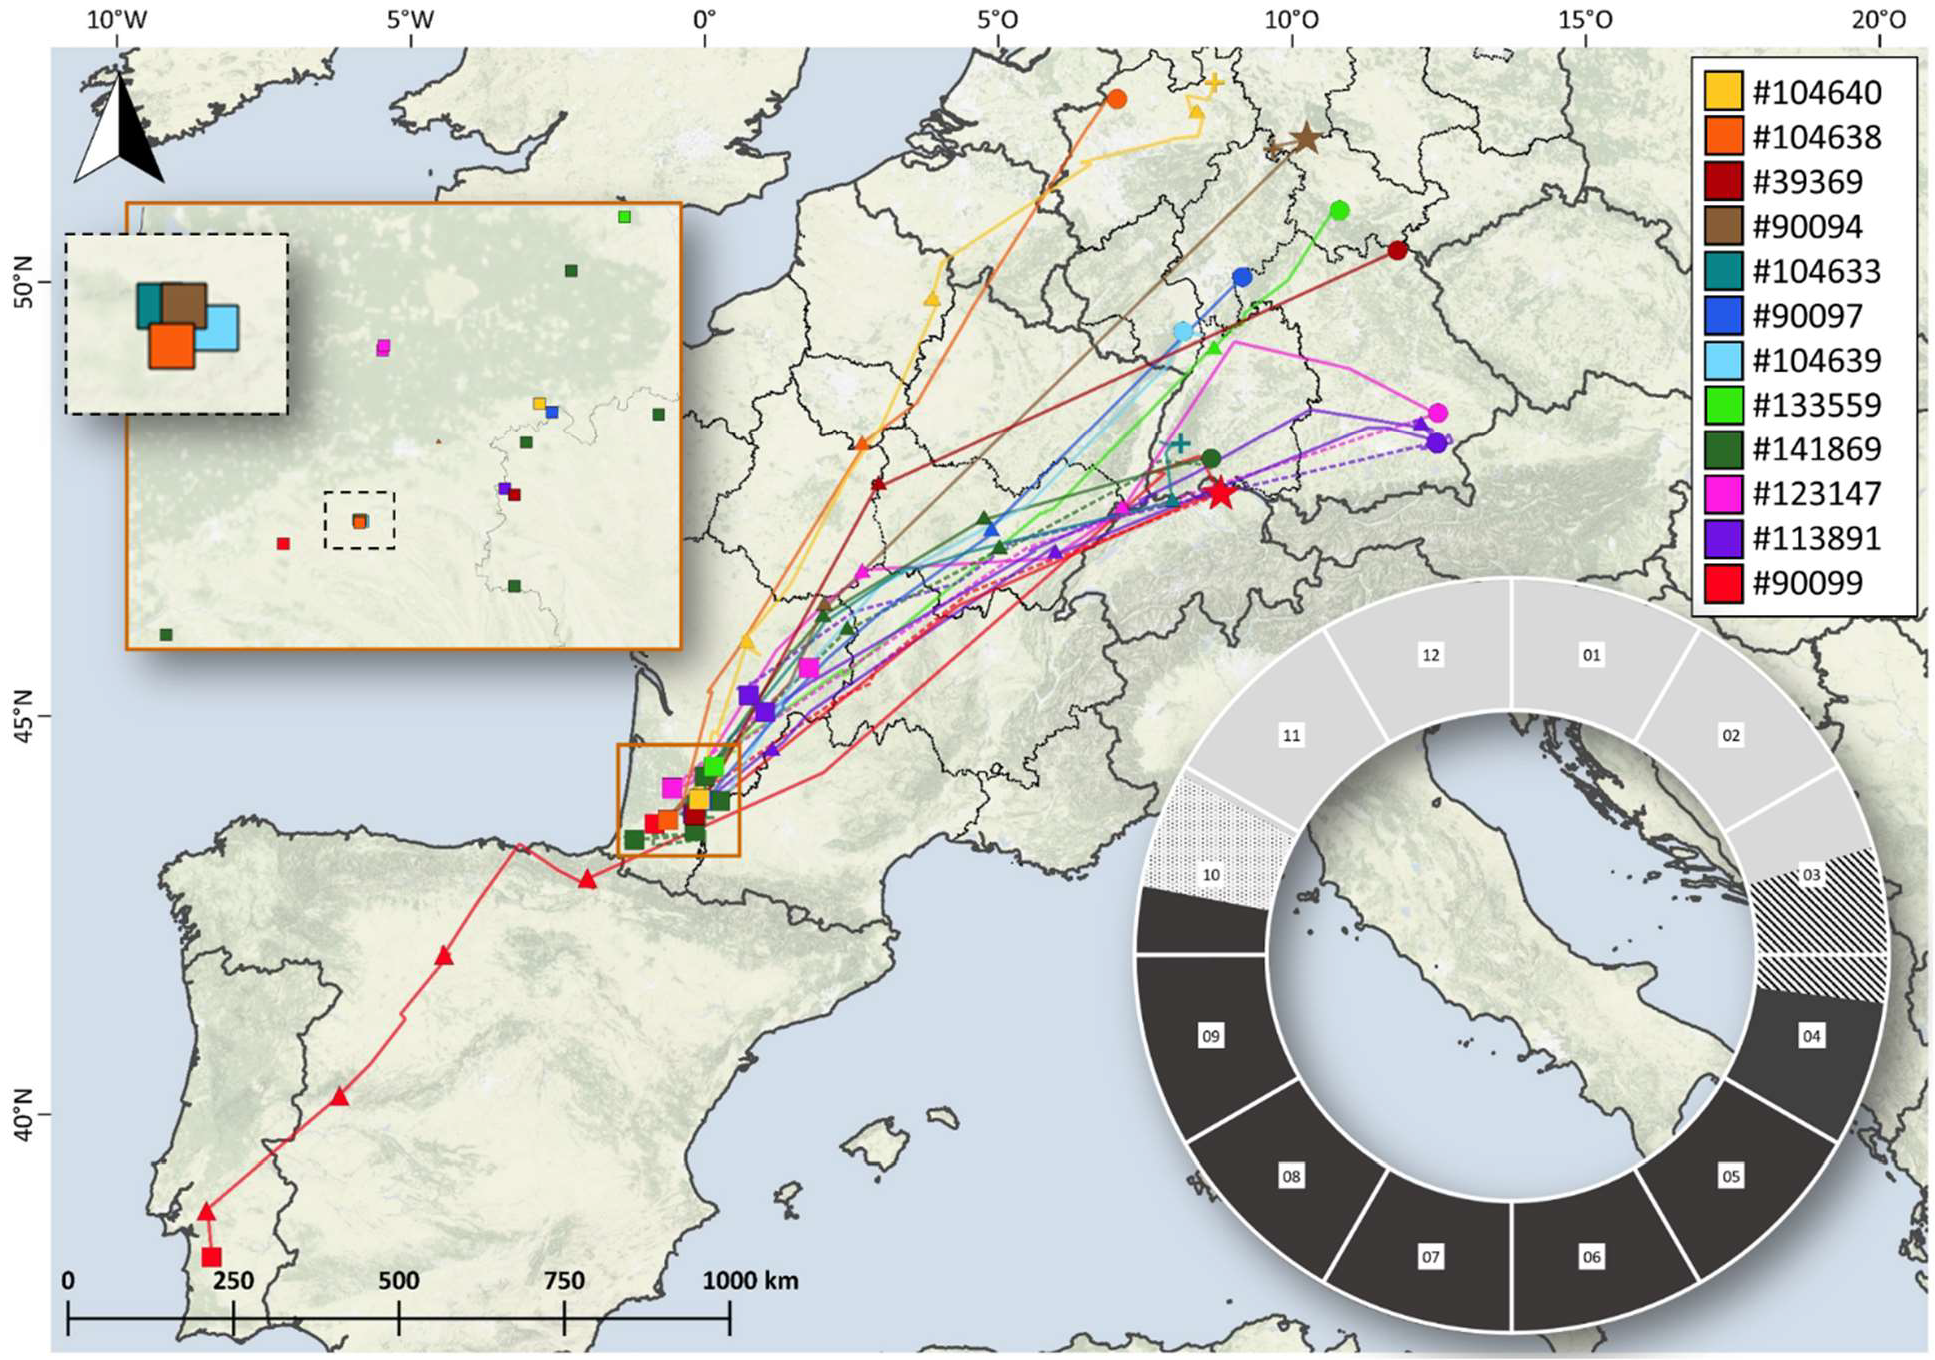 Tracks of twelve woodpigeon equipped with Argos transmitters (PTT non-solar or solar tags) in France (11 individuals) and Portugal (1 individual) during the wintering (non-breeding) season (from [Schumm et al., 2022])